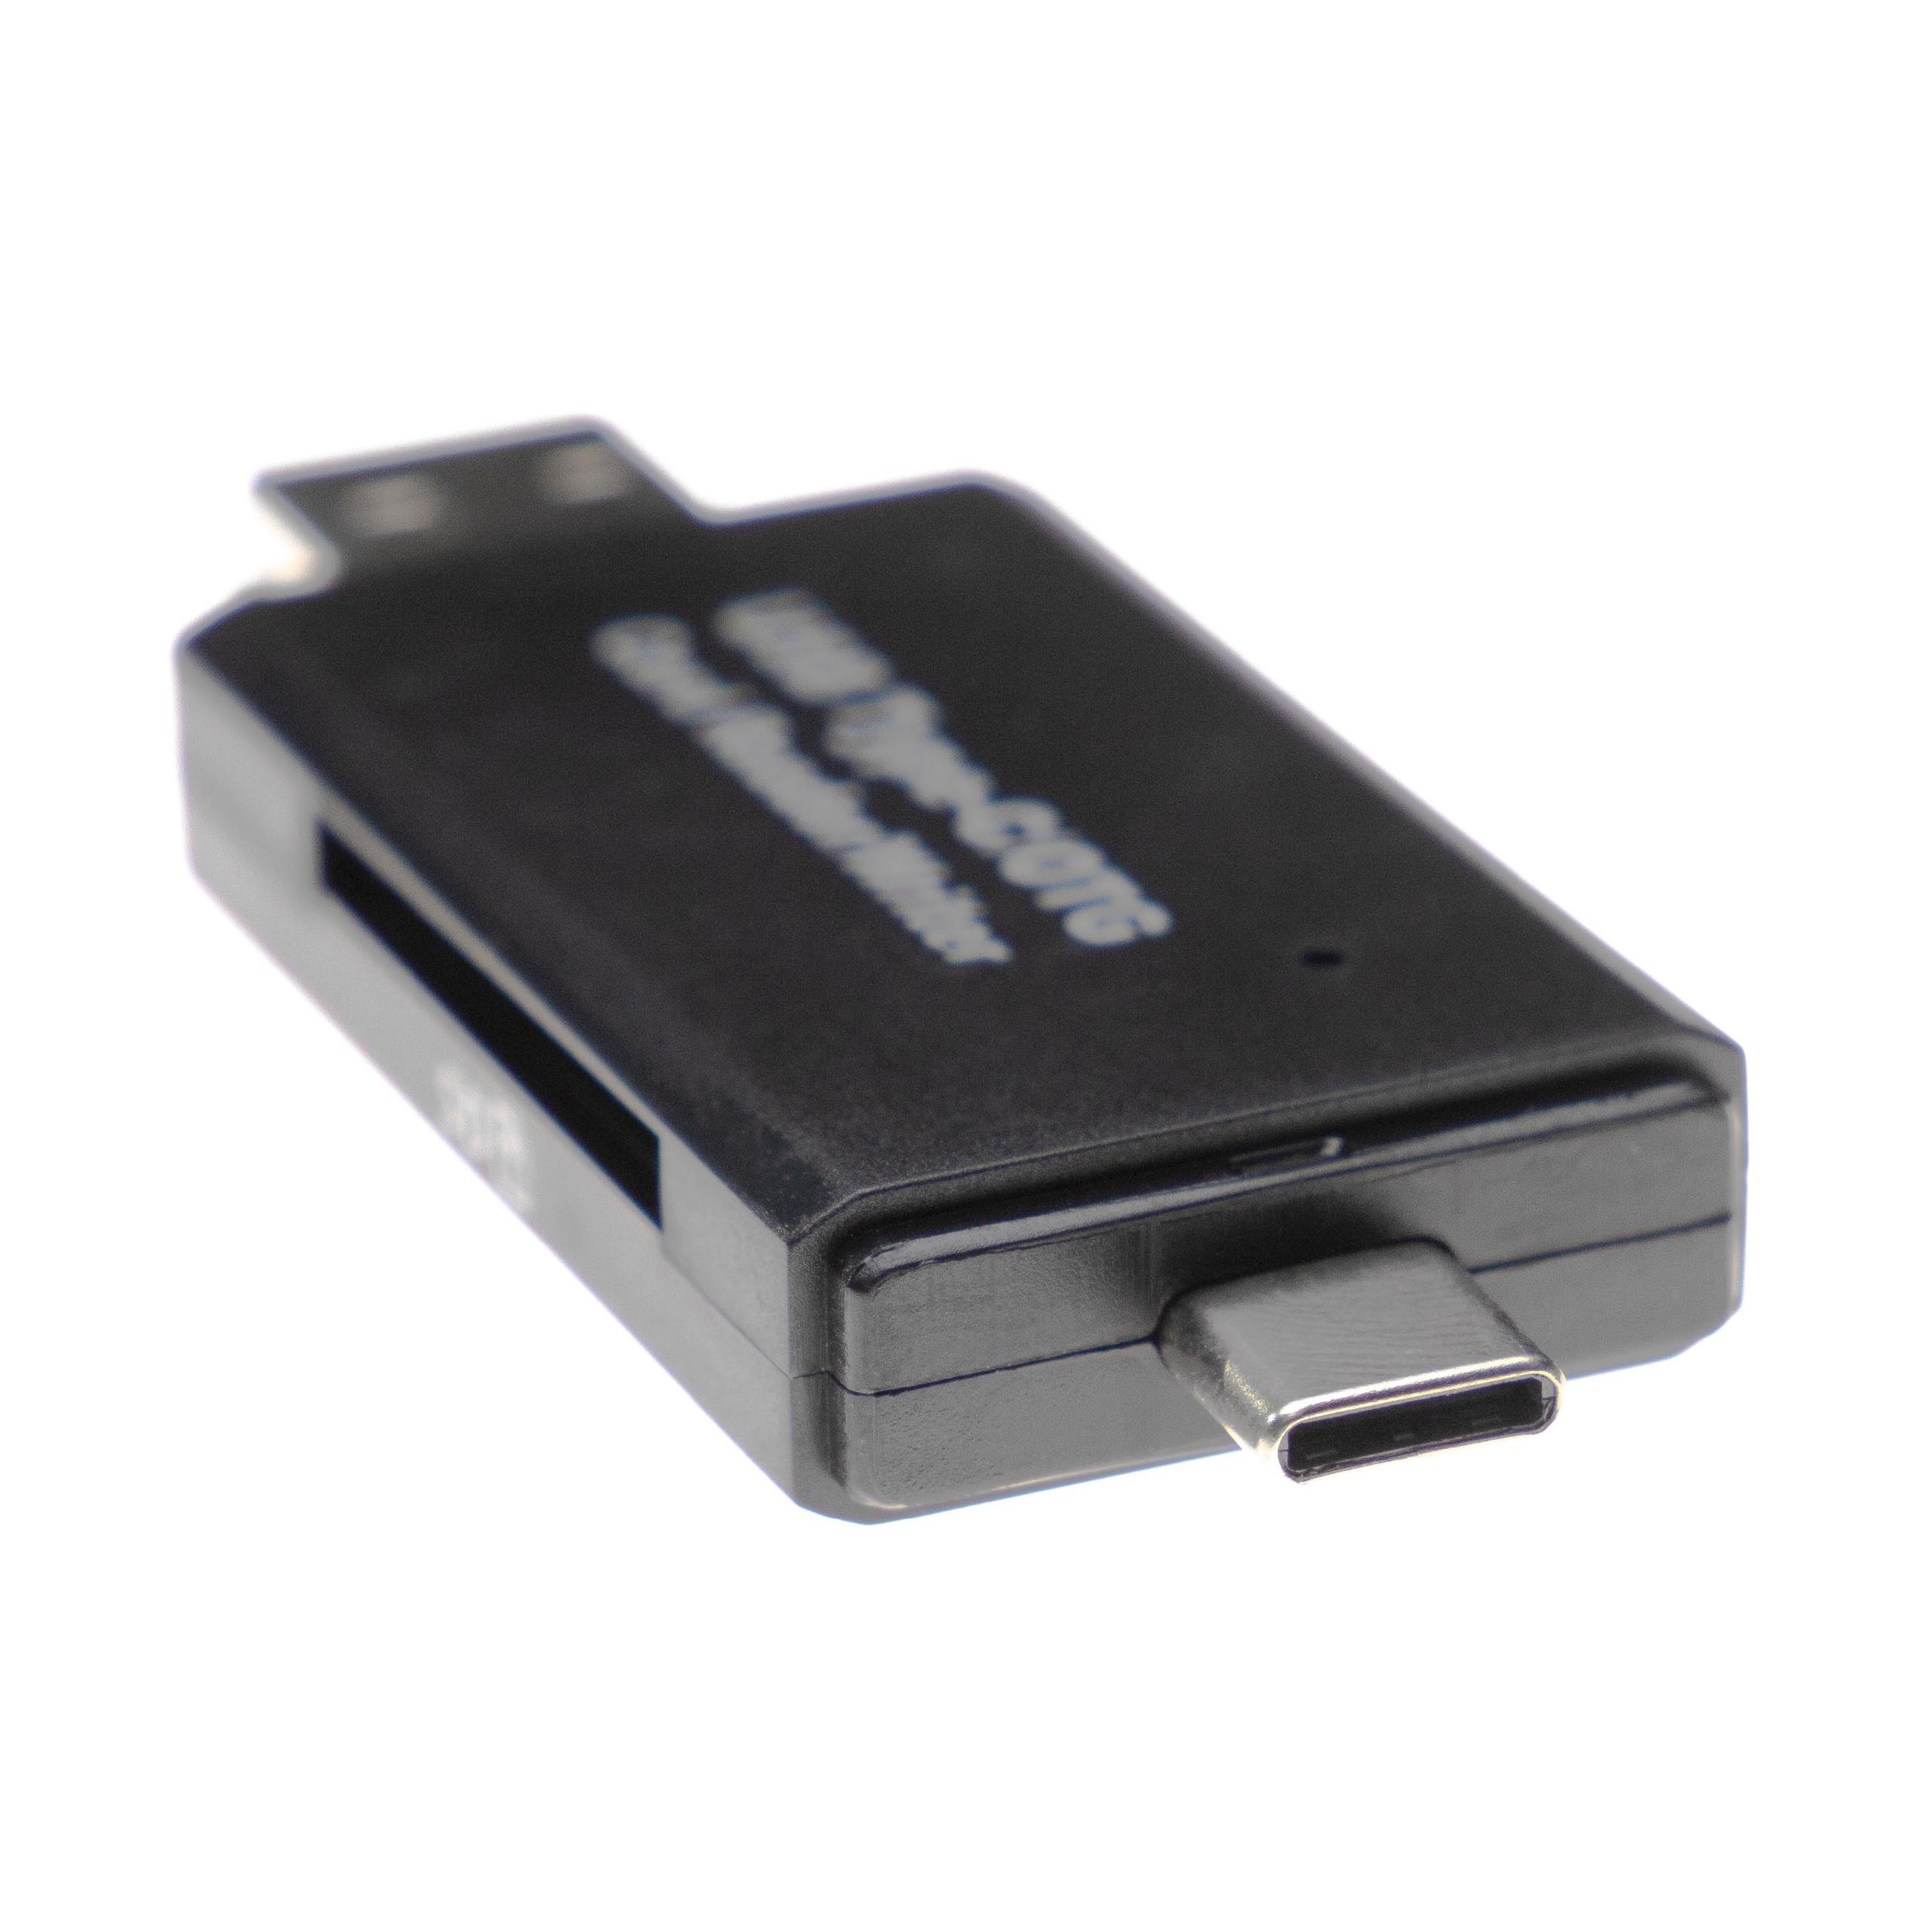 SD Card Reader suitable forMicro-SD, Mini-SD Memory Cards - With Protective Cap